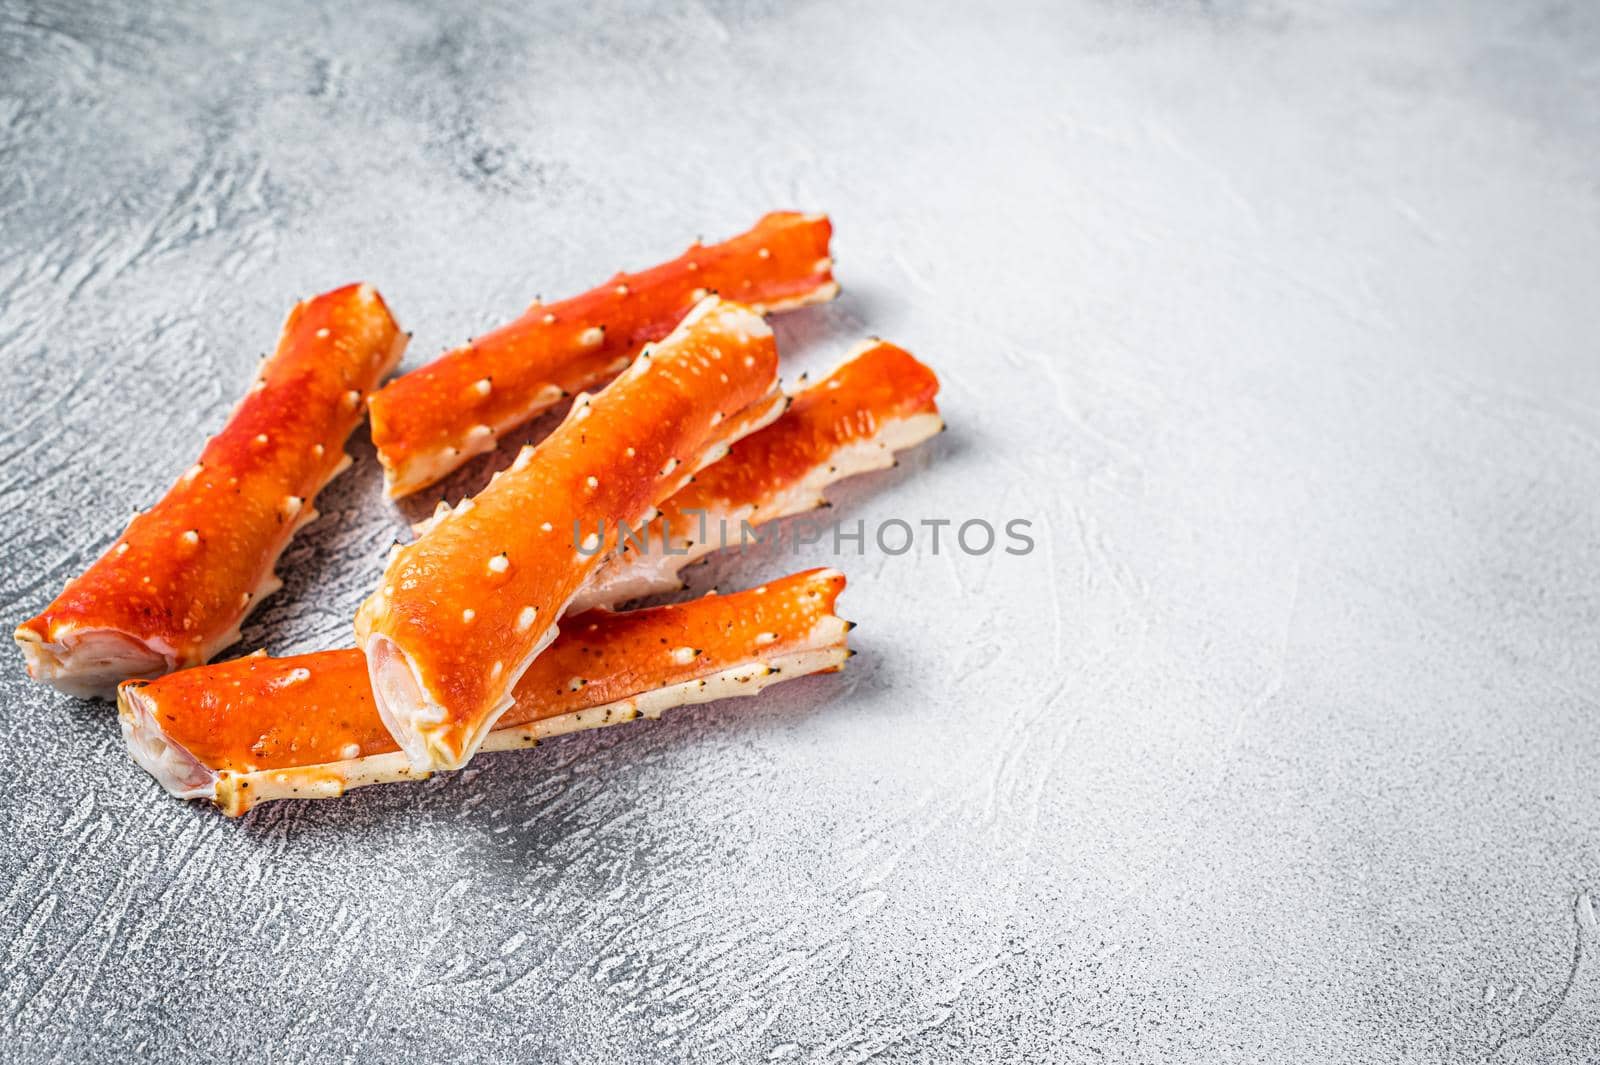 Crab legs Phalanx on a kitchen table. White background. Top view. Copy space.